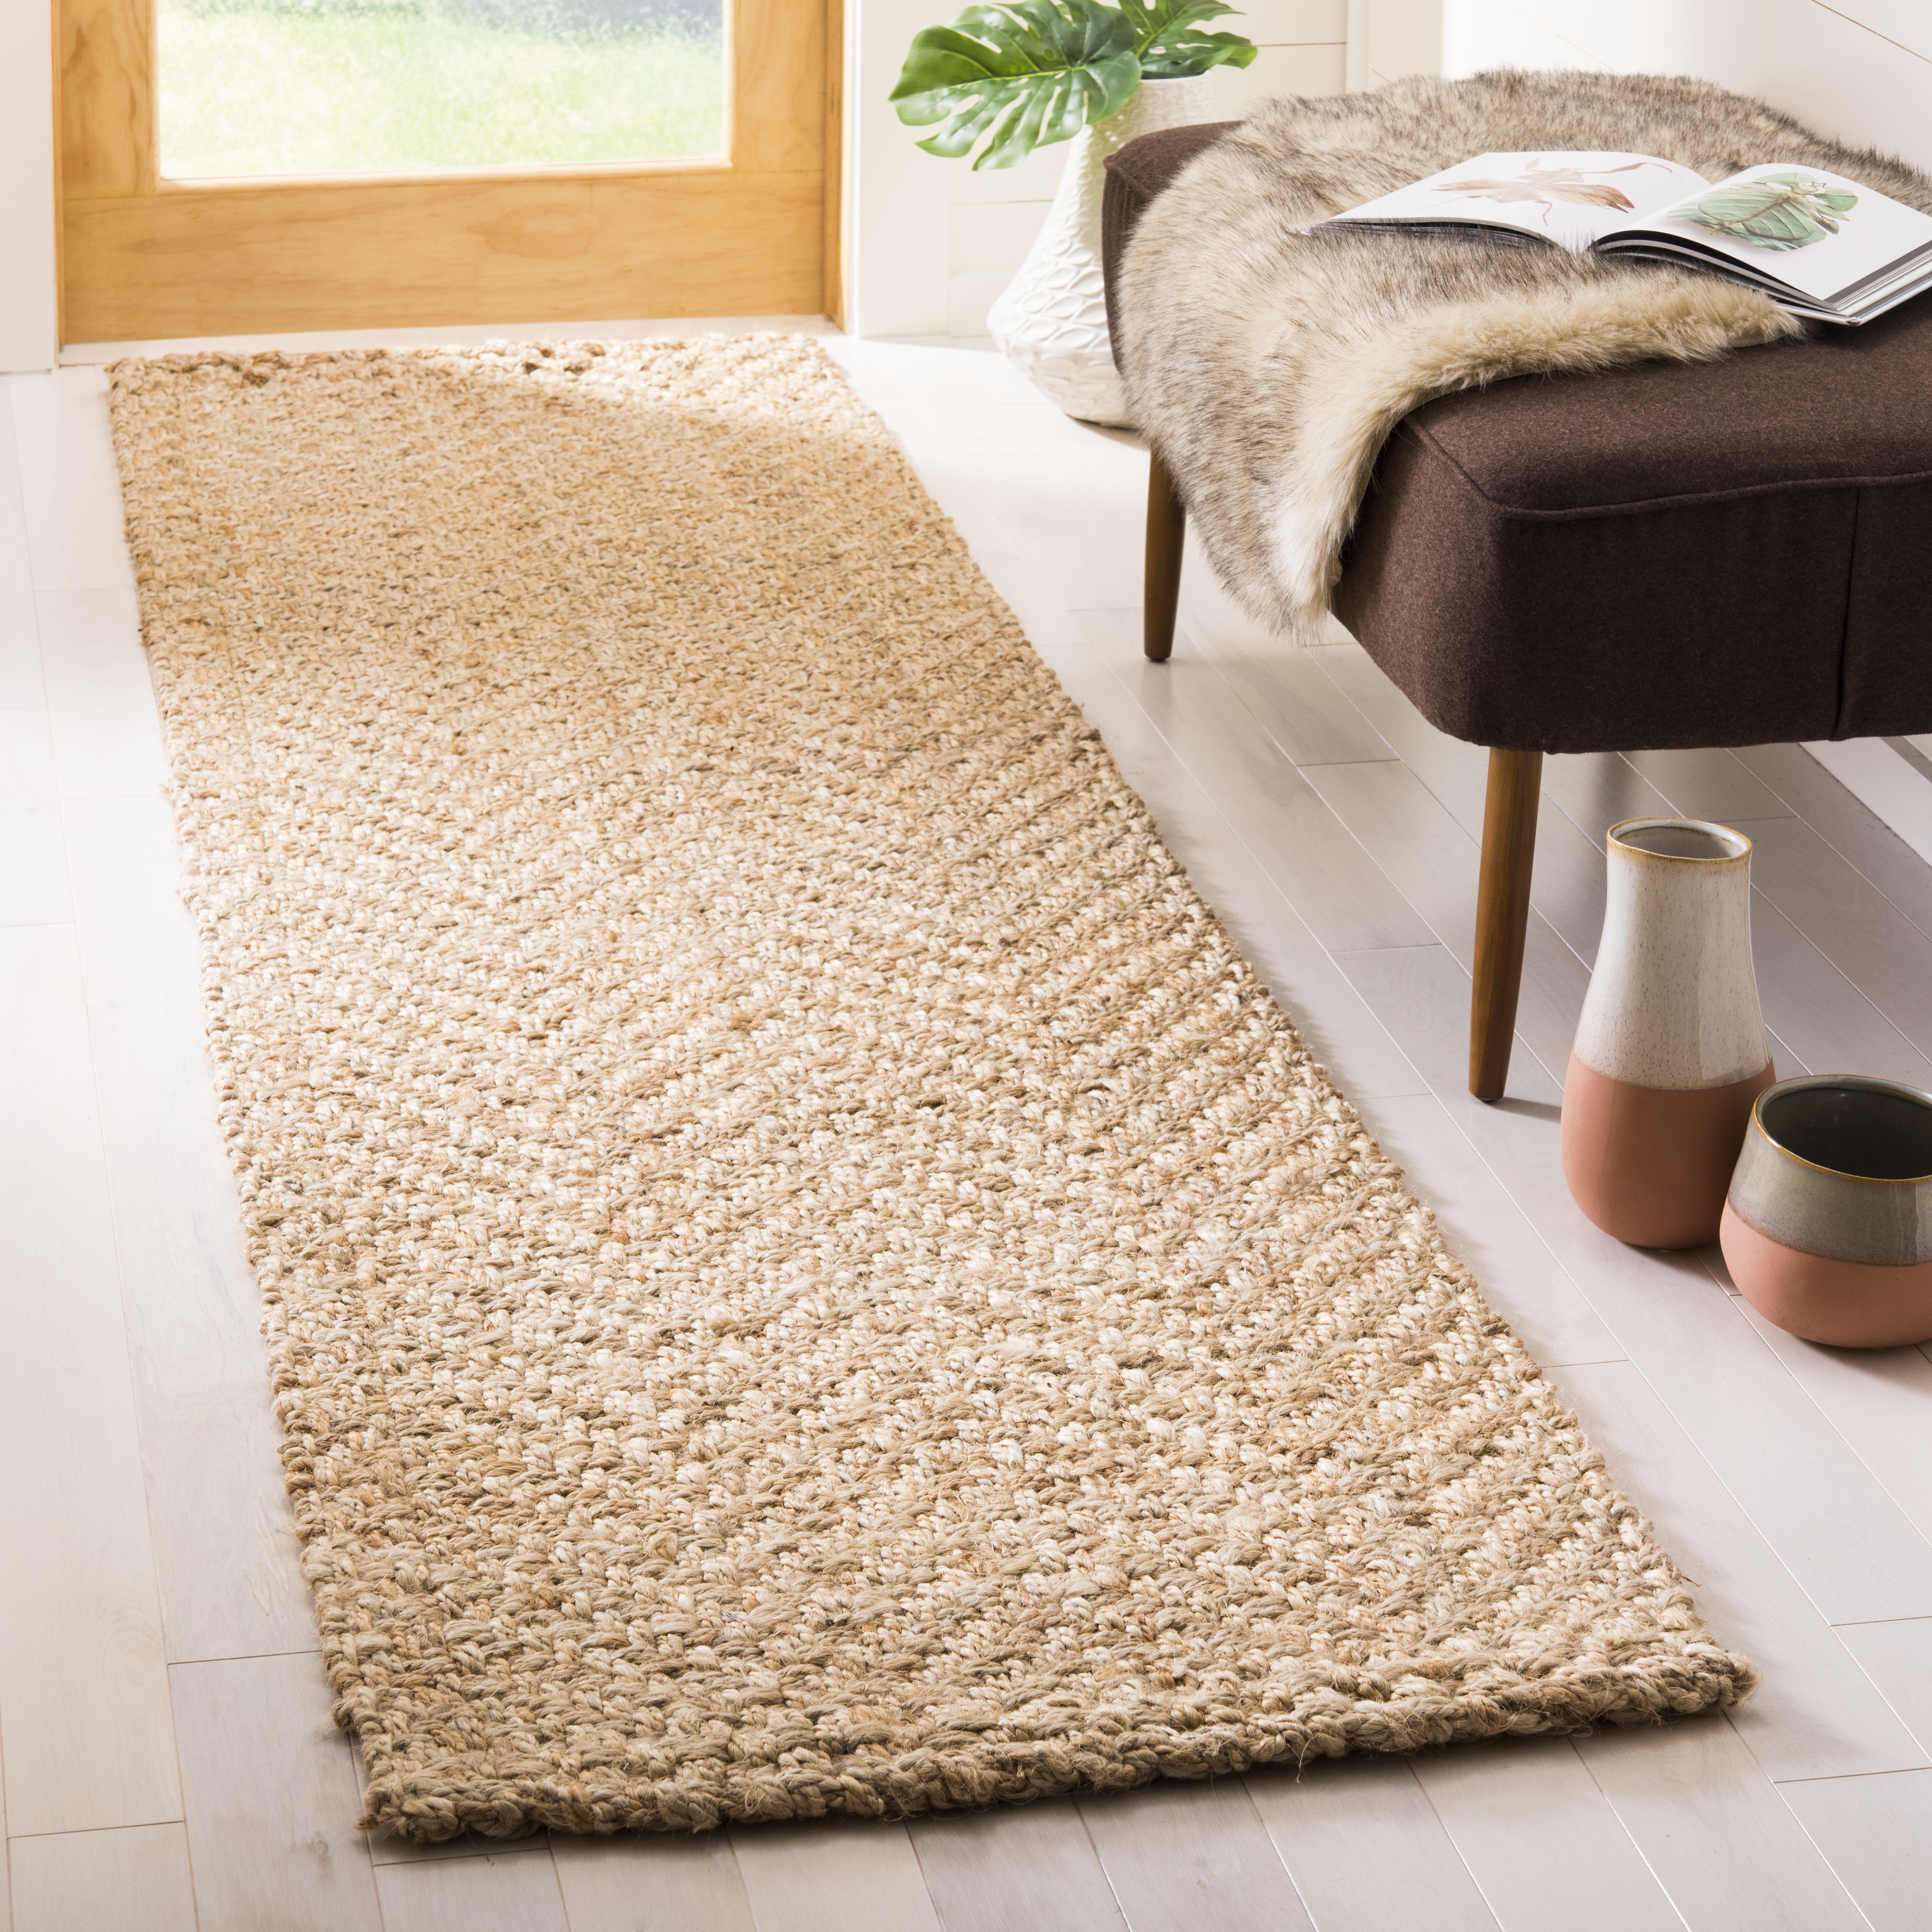 Arlo Home Hand Woven Area Rug, NF265A, Natural,  2' 3" X 8' - Image 1